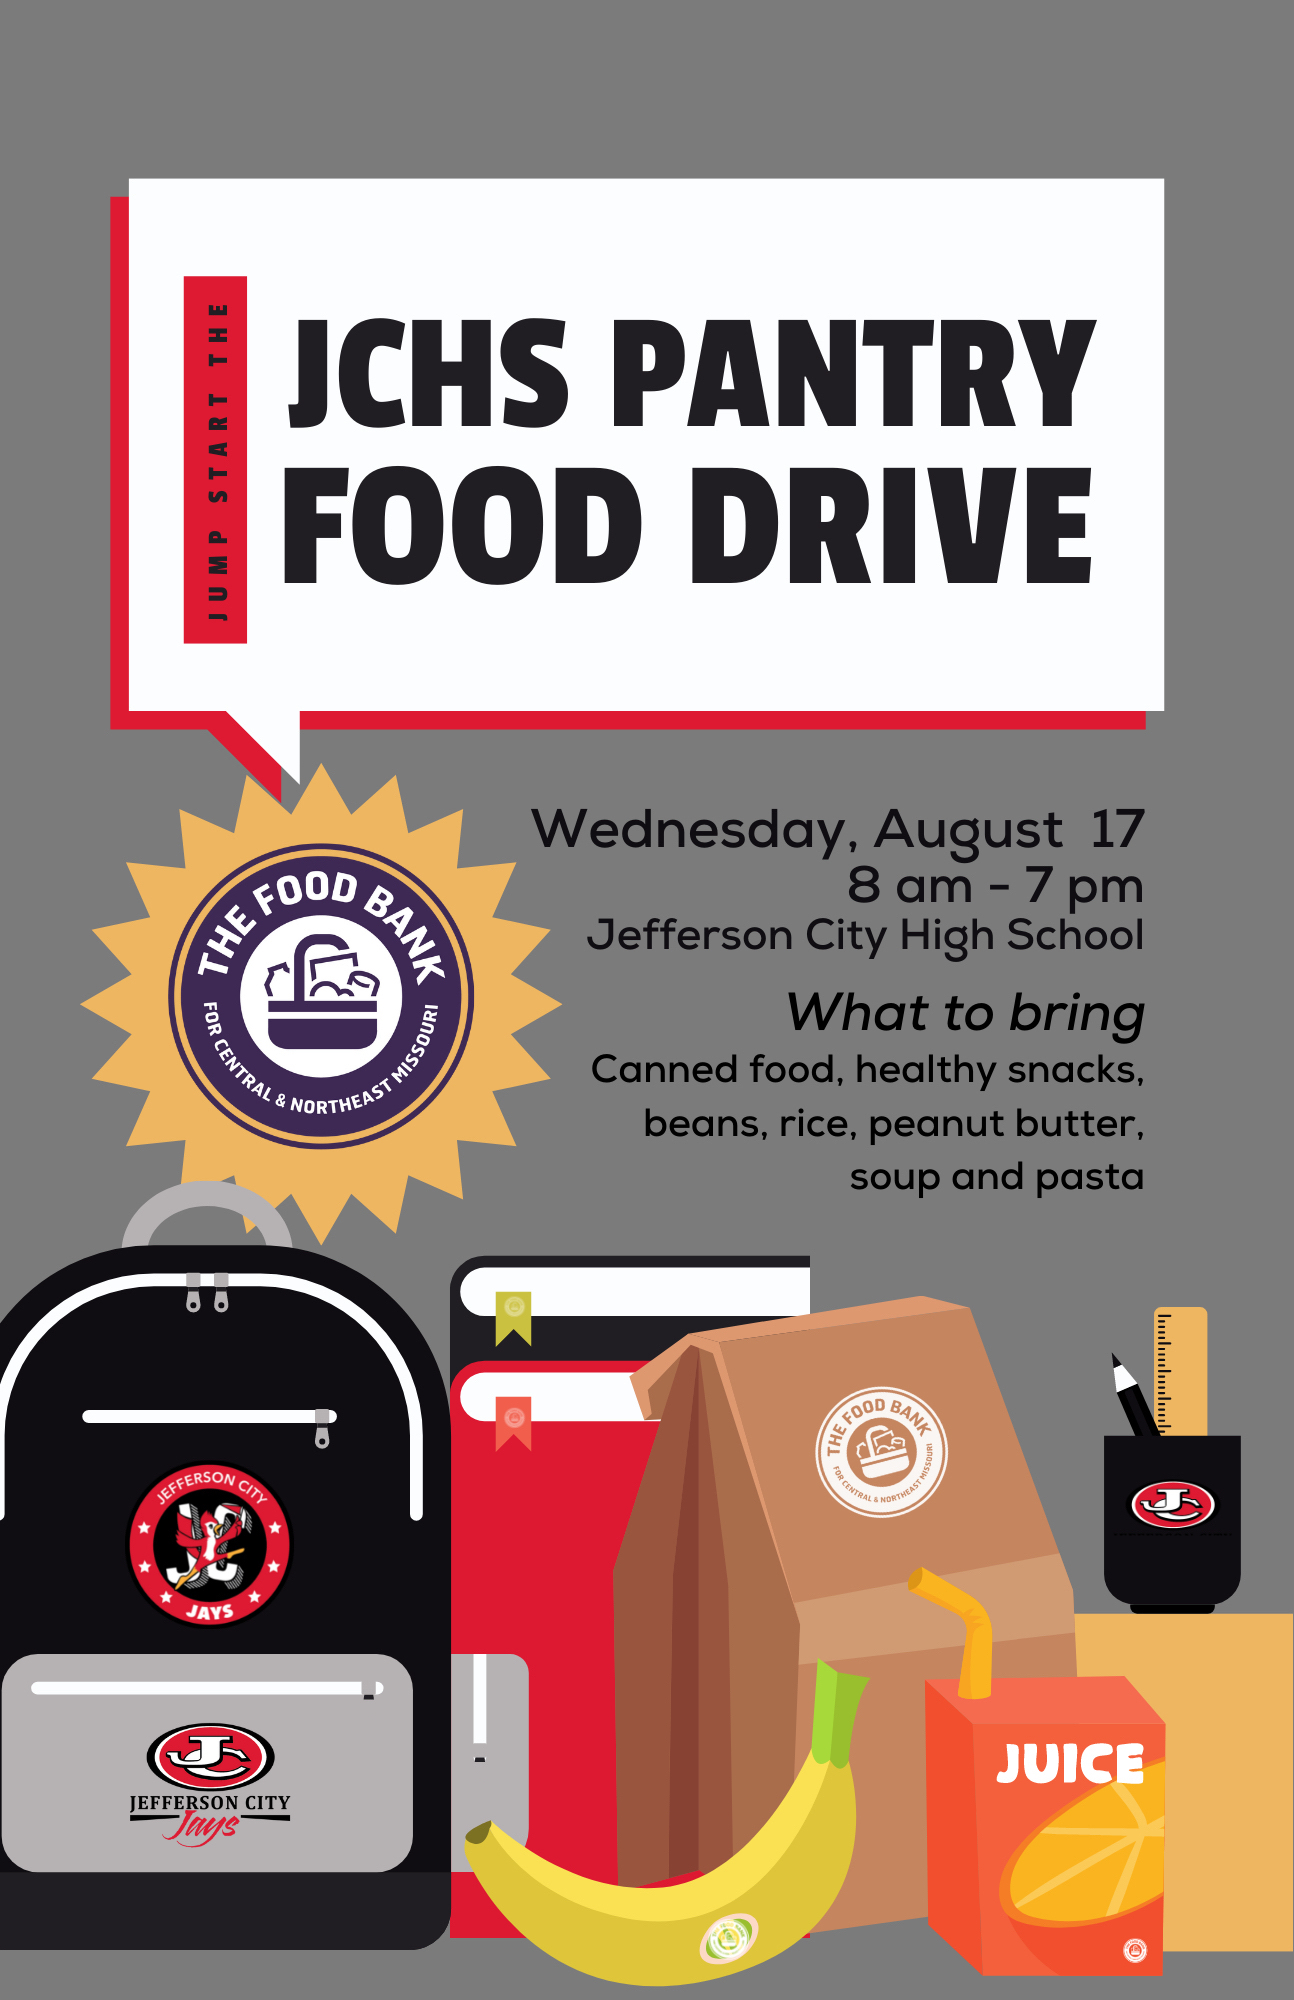 JCHS Pantry Food Drive with The Food Bank